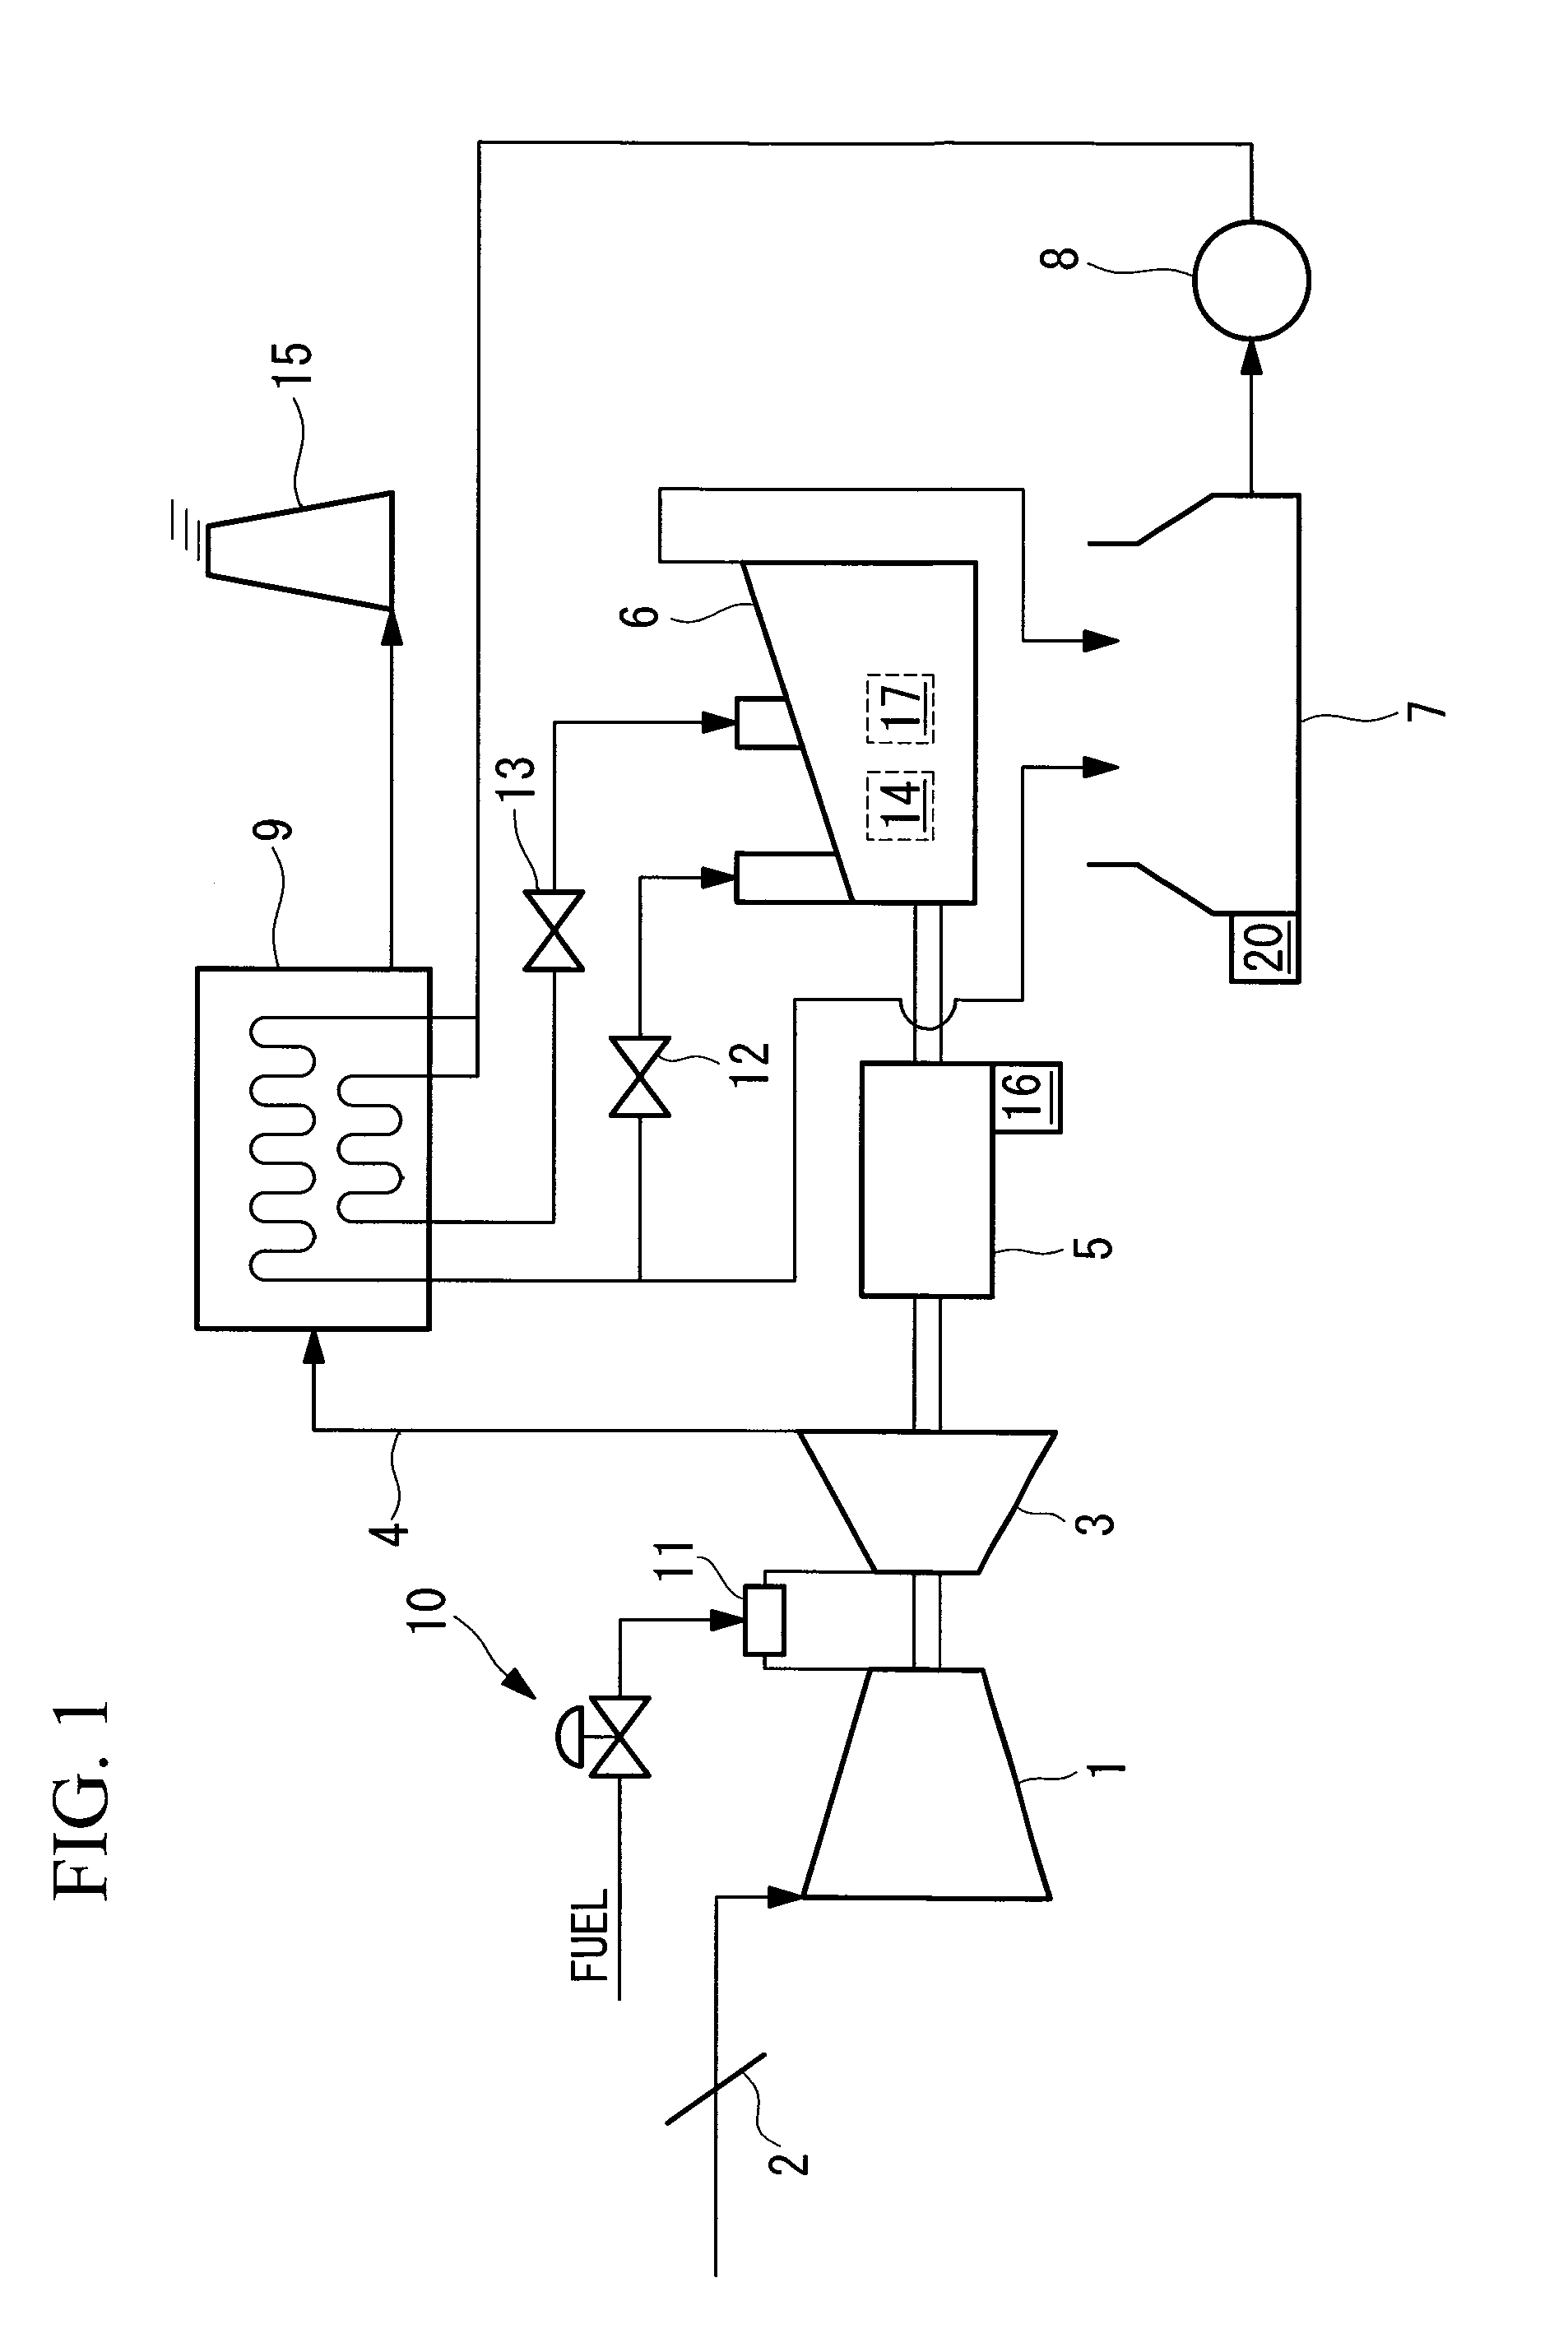 Gas turbine control system and method for single-shaft combined cycle plant